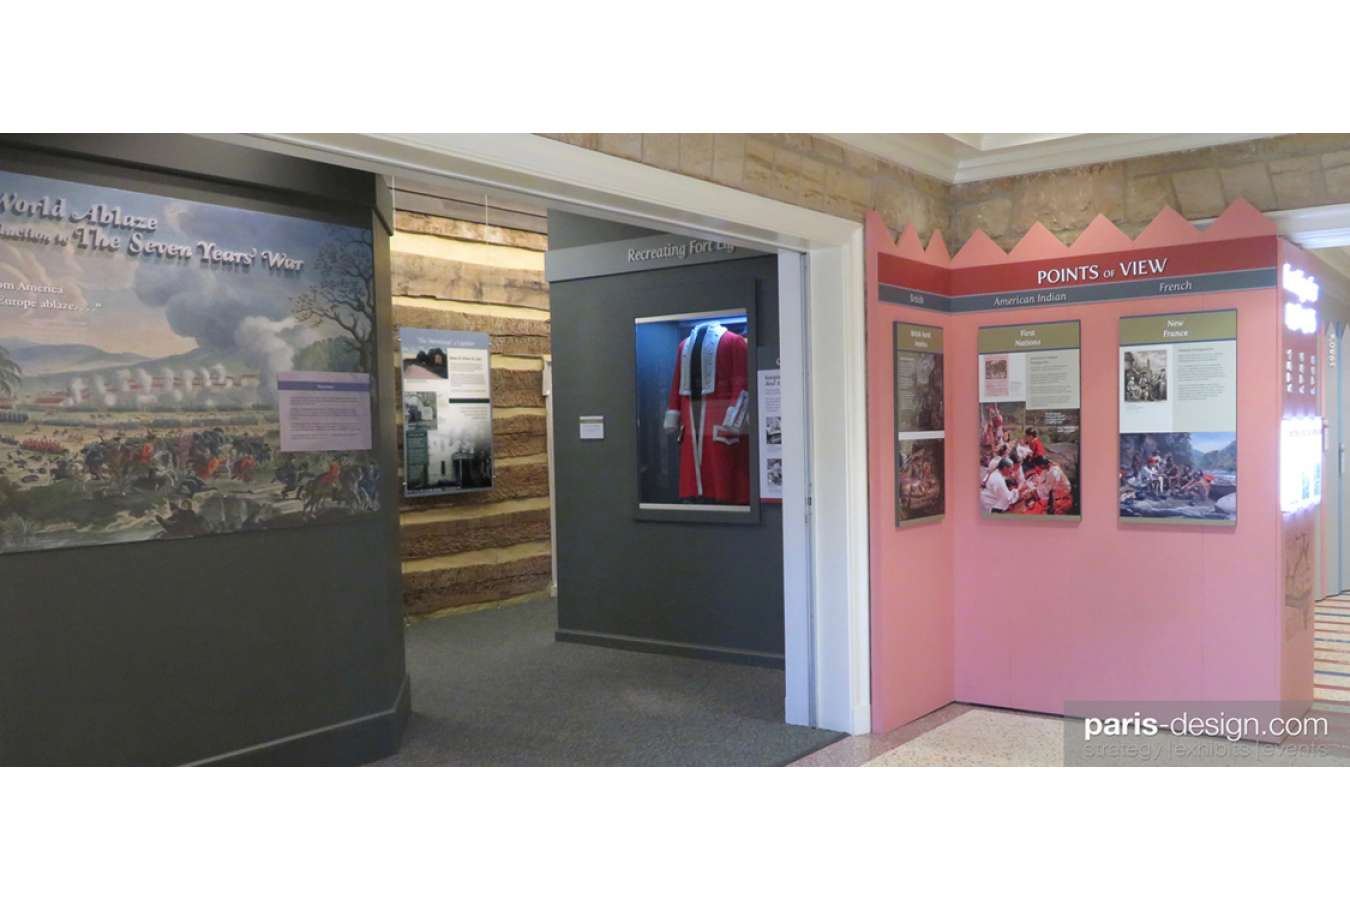 2W  FTLIG Arch Entry : Many display elements reference the restored Fort Ligonier structures outside this museum